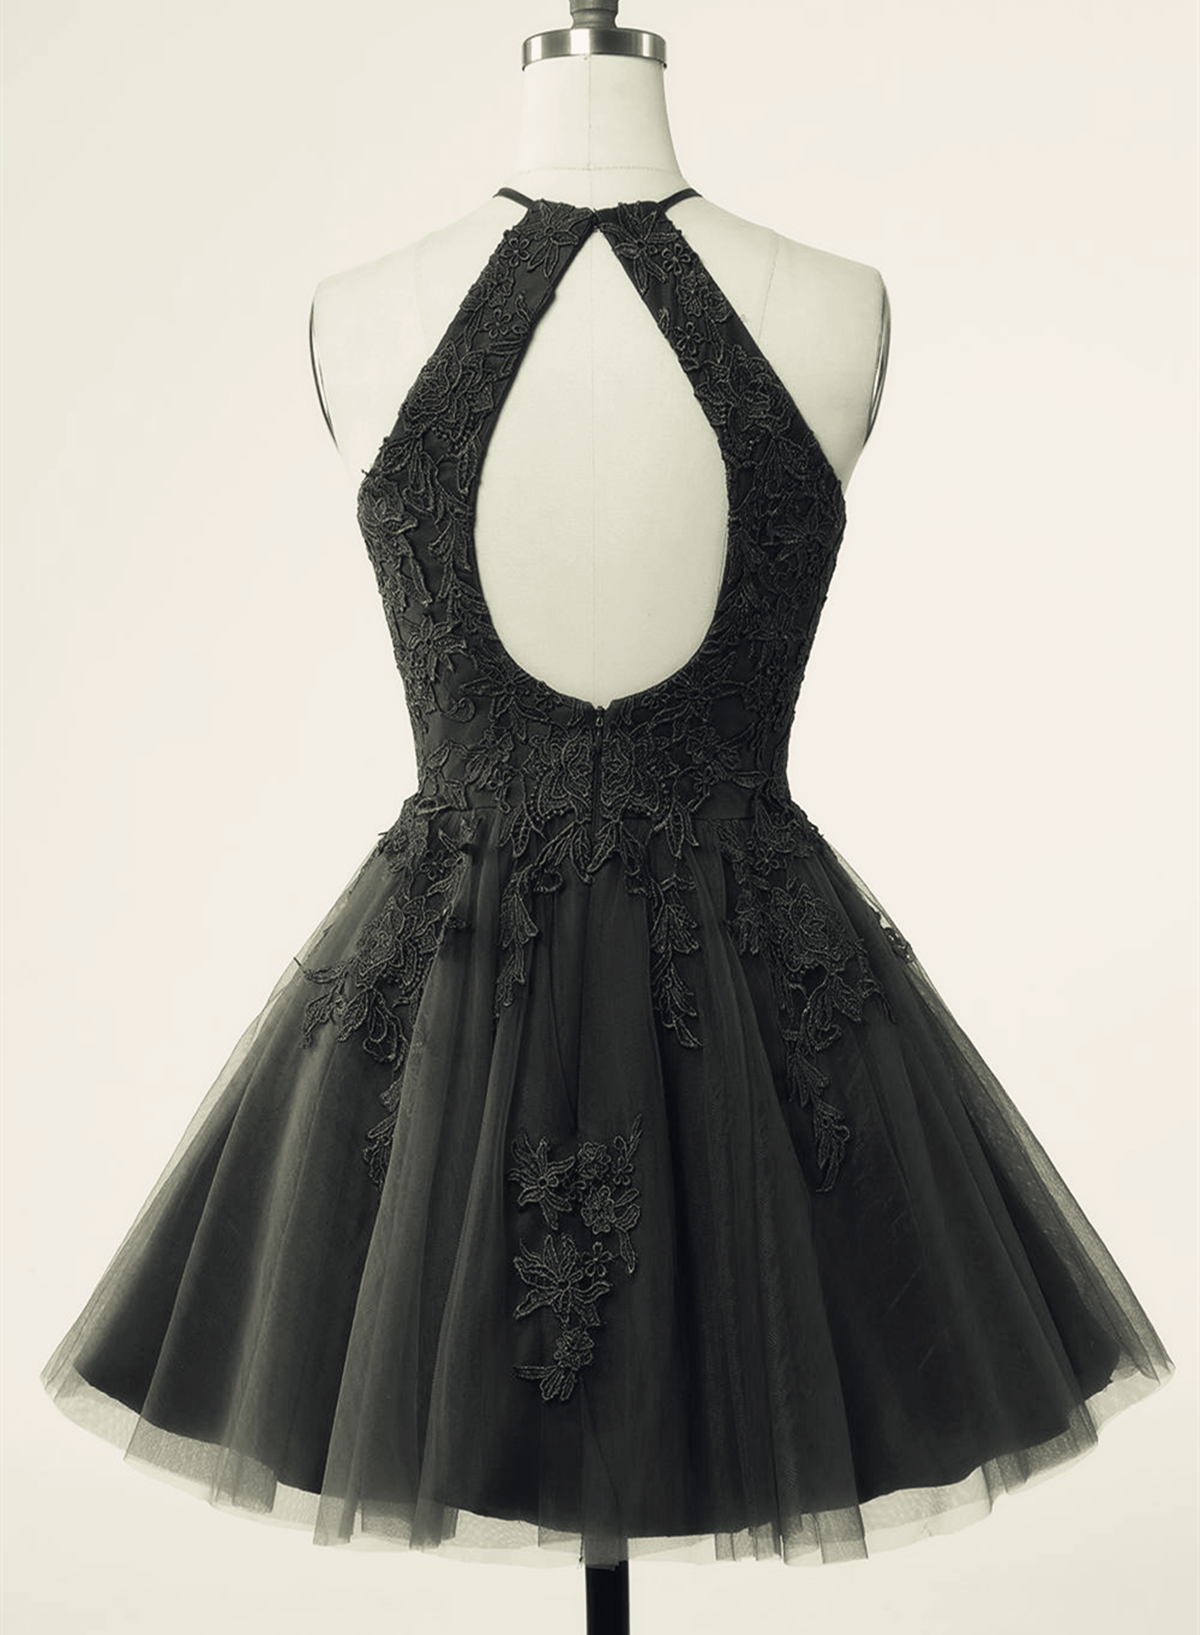 Formal Dress Classy Elegant, Black Halter Tulle With Lace Short Party Dress, Black Tulle Homecoming Dress